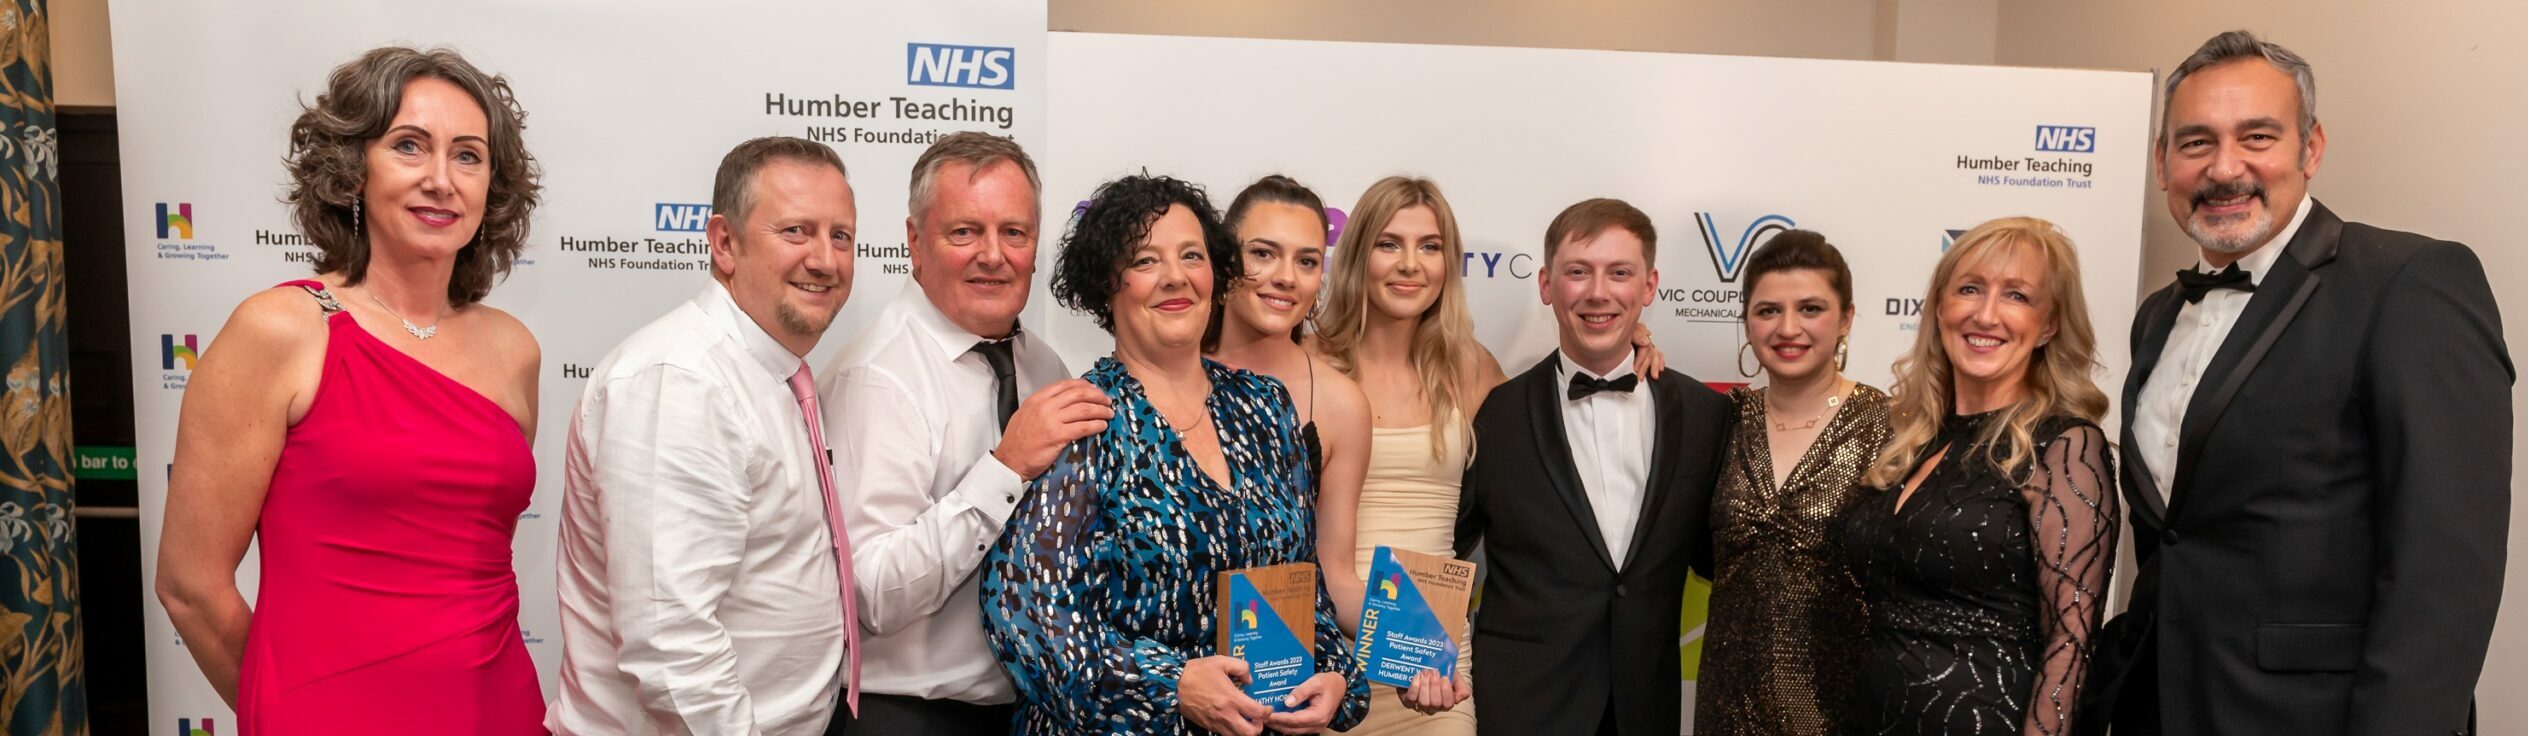 Alessandro Caruso Architects sponsor Humber Teaching NHS Staff Awards